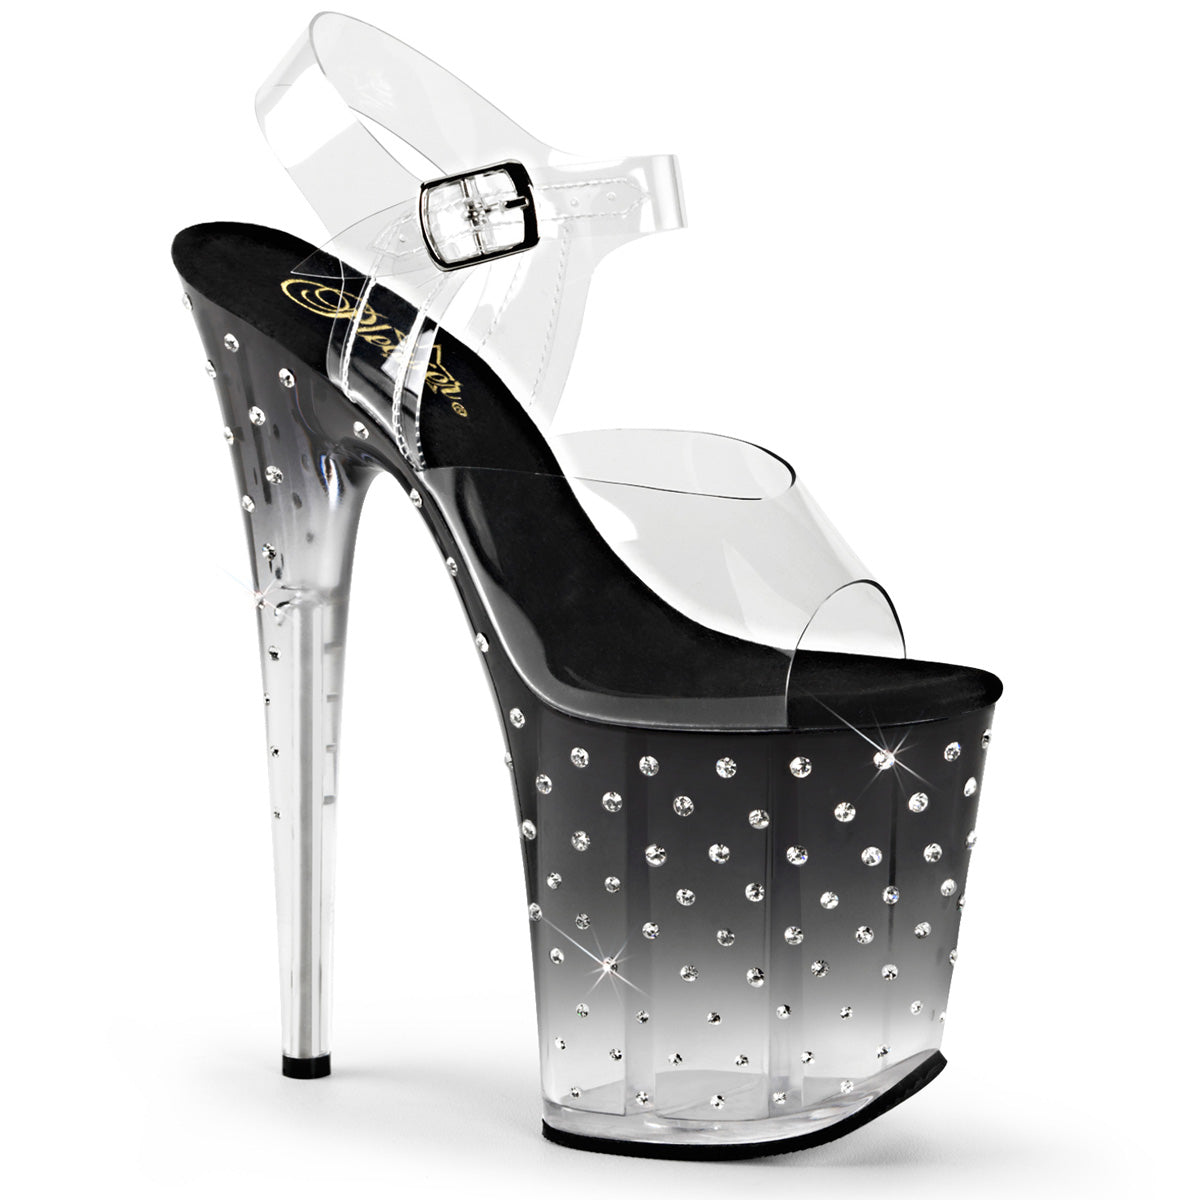 STARDUST-808T Clear/Black Clear Sandals